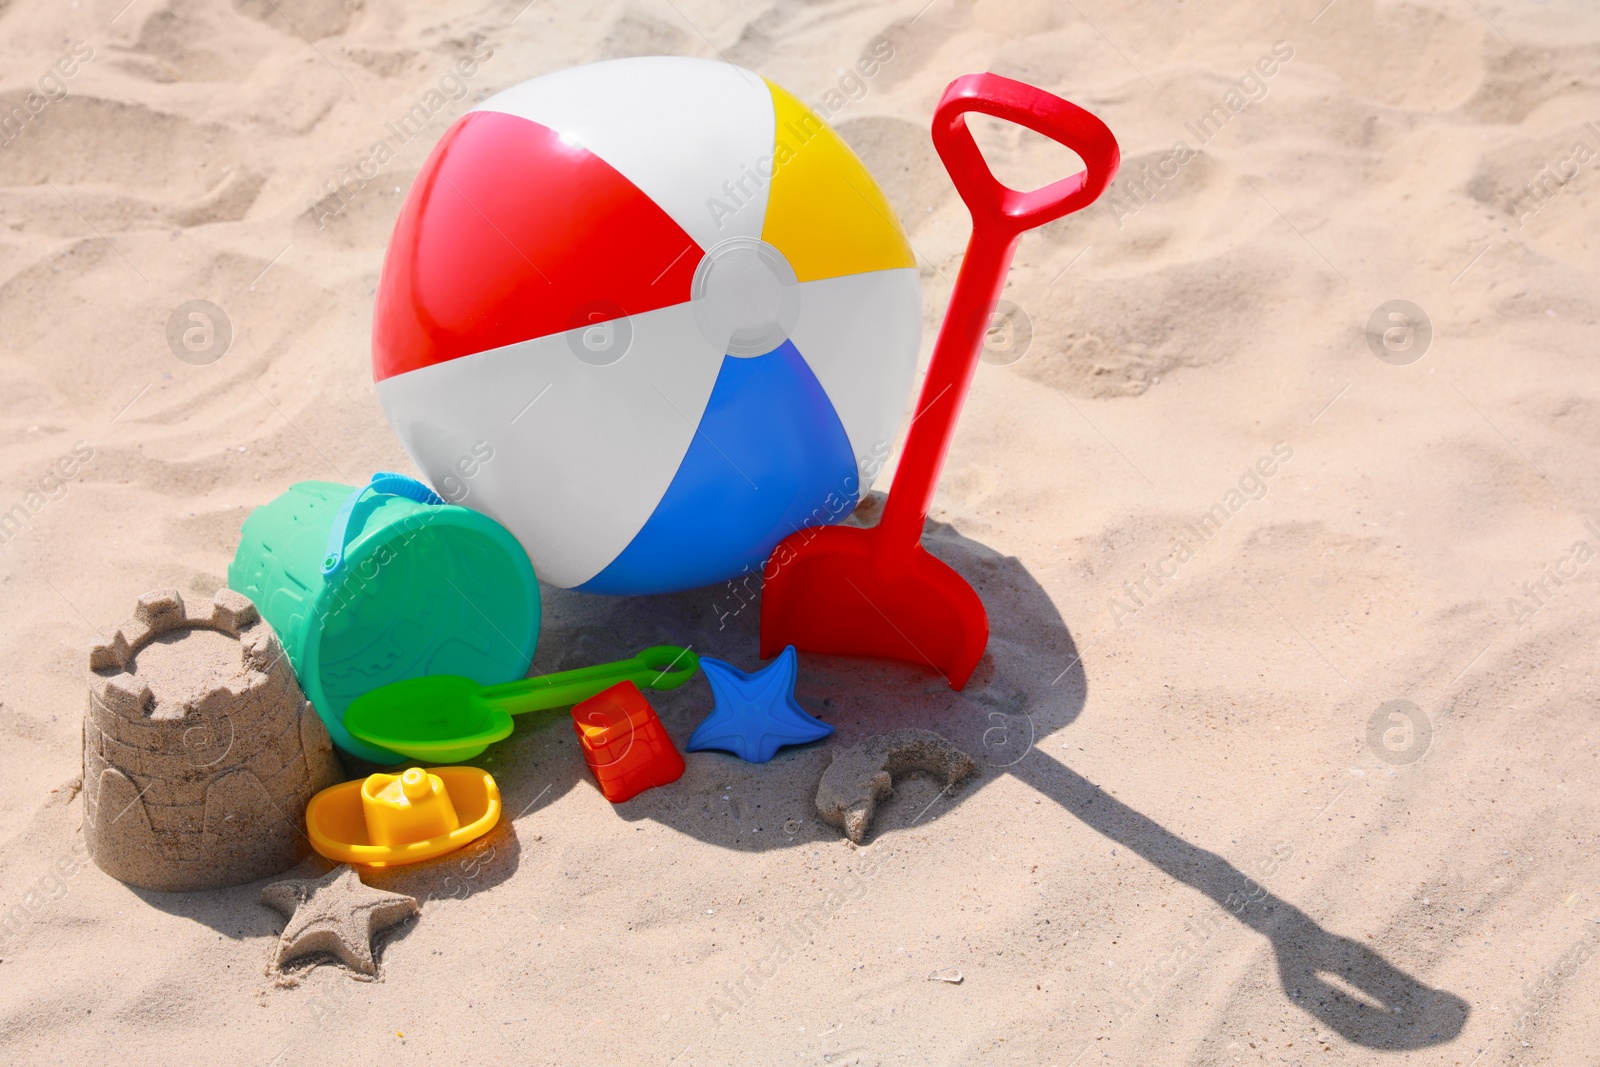 Photo of Different beach toys and inflatable ball on sand outdoors, space for text